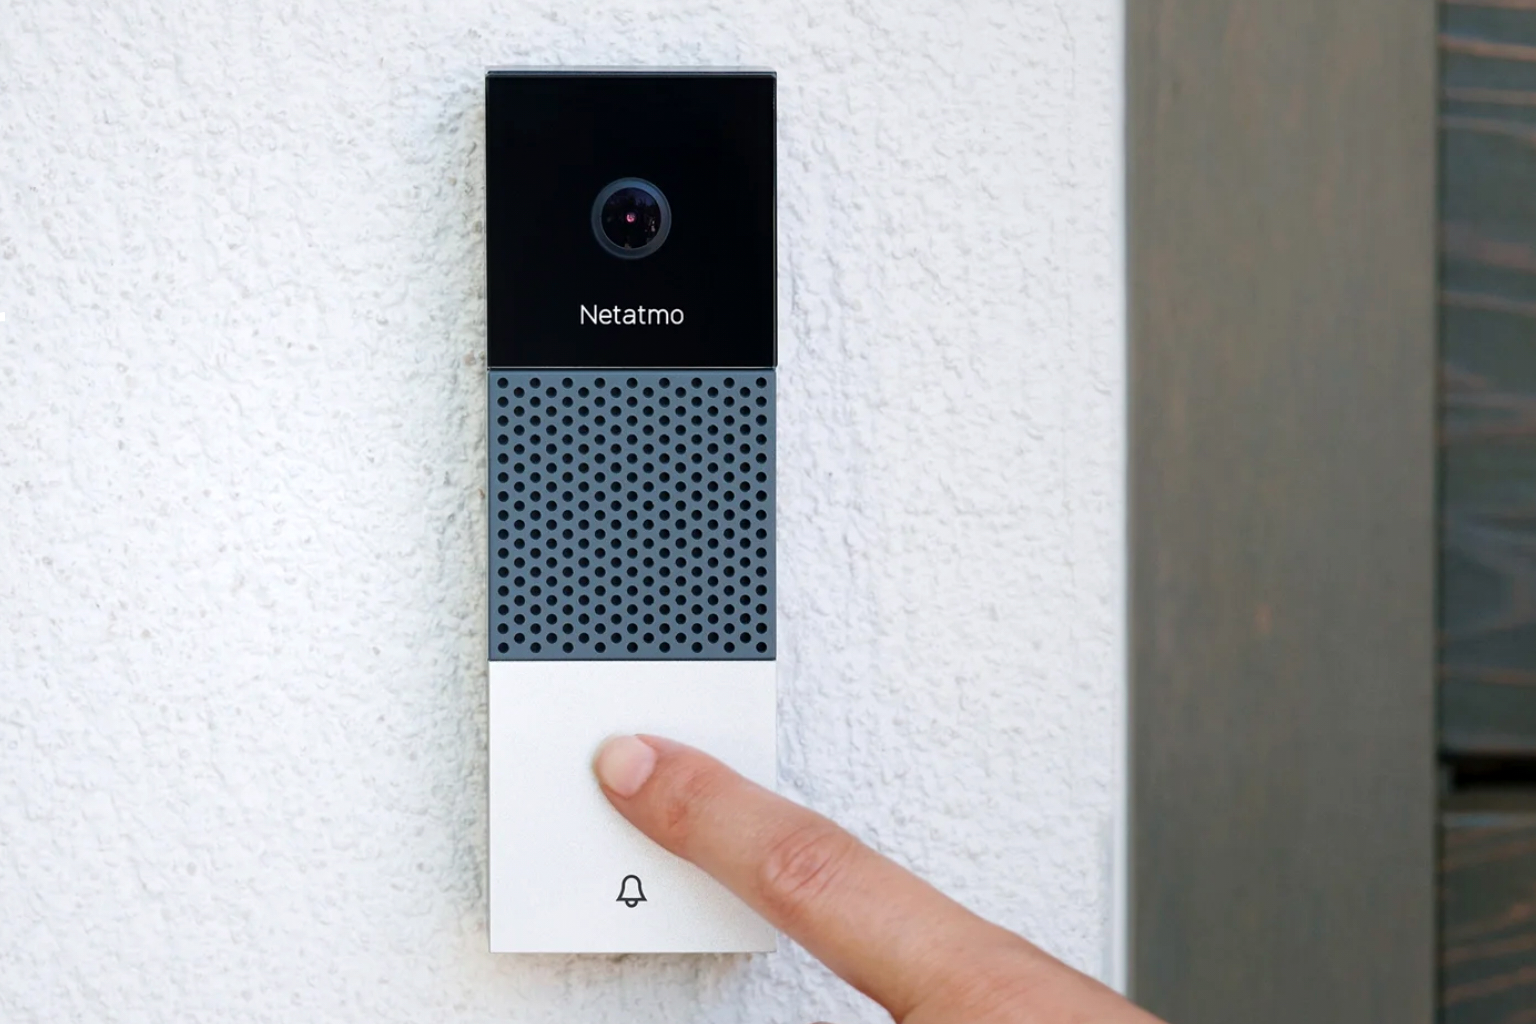 Review: The Netatmo Smart Video Doorbell ticks three boxes for me